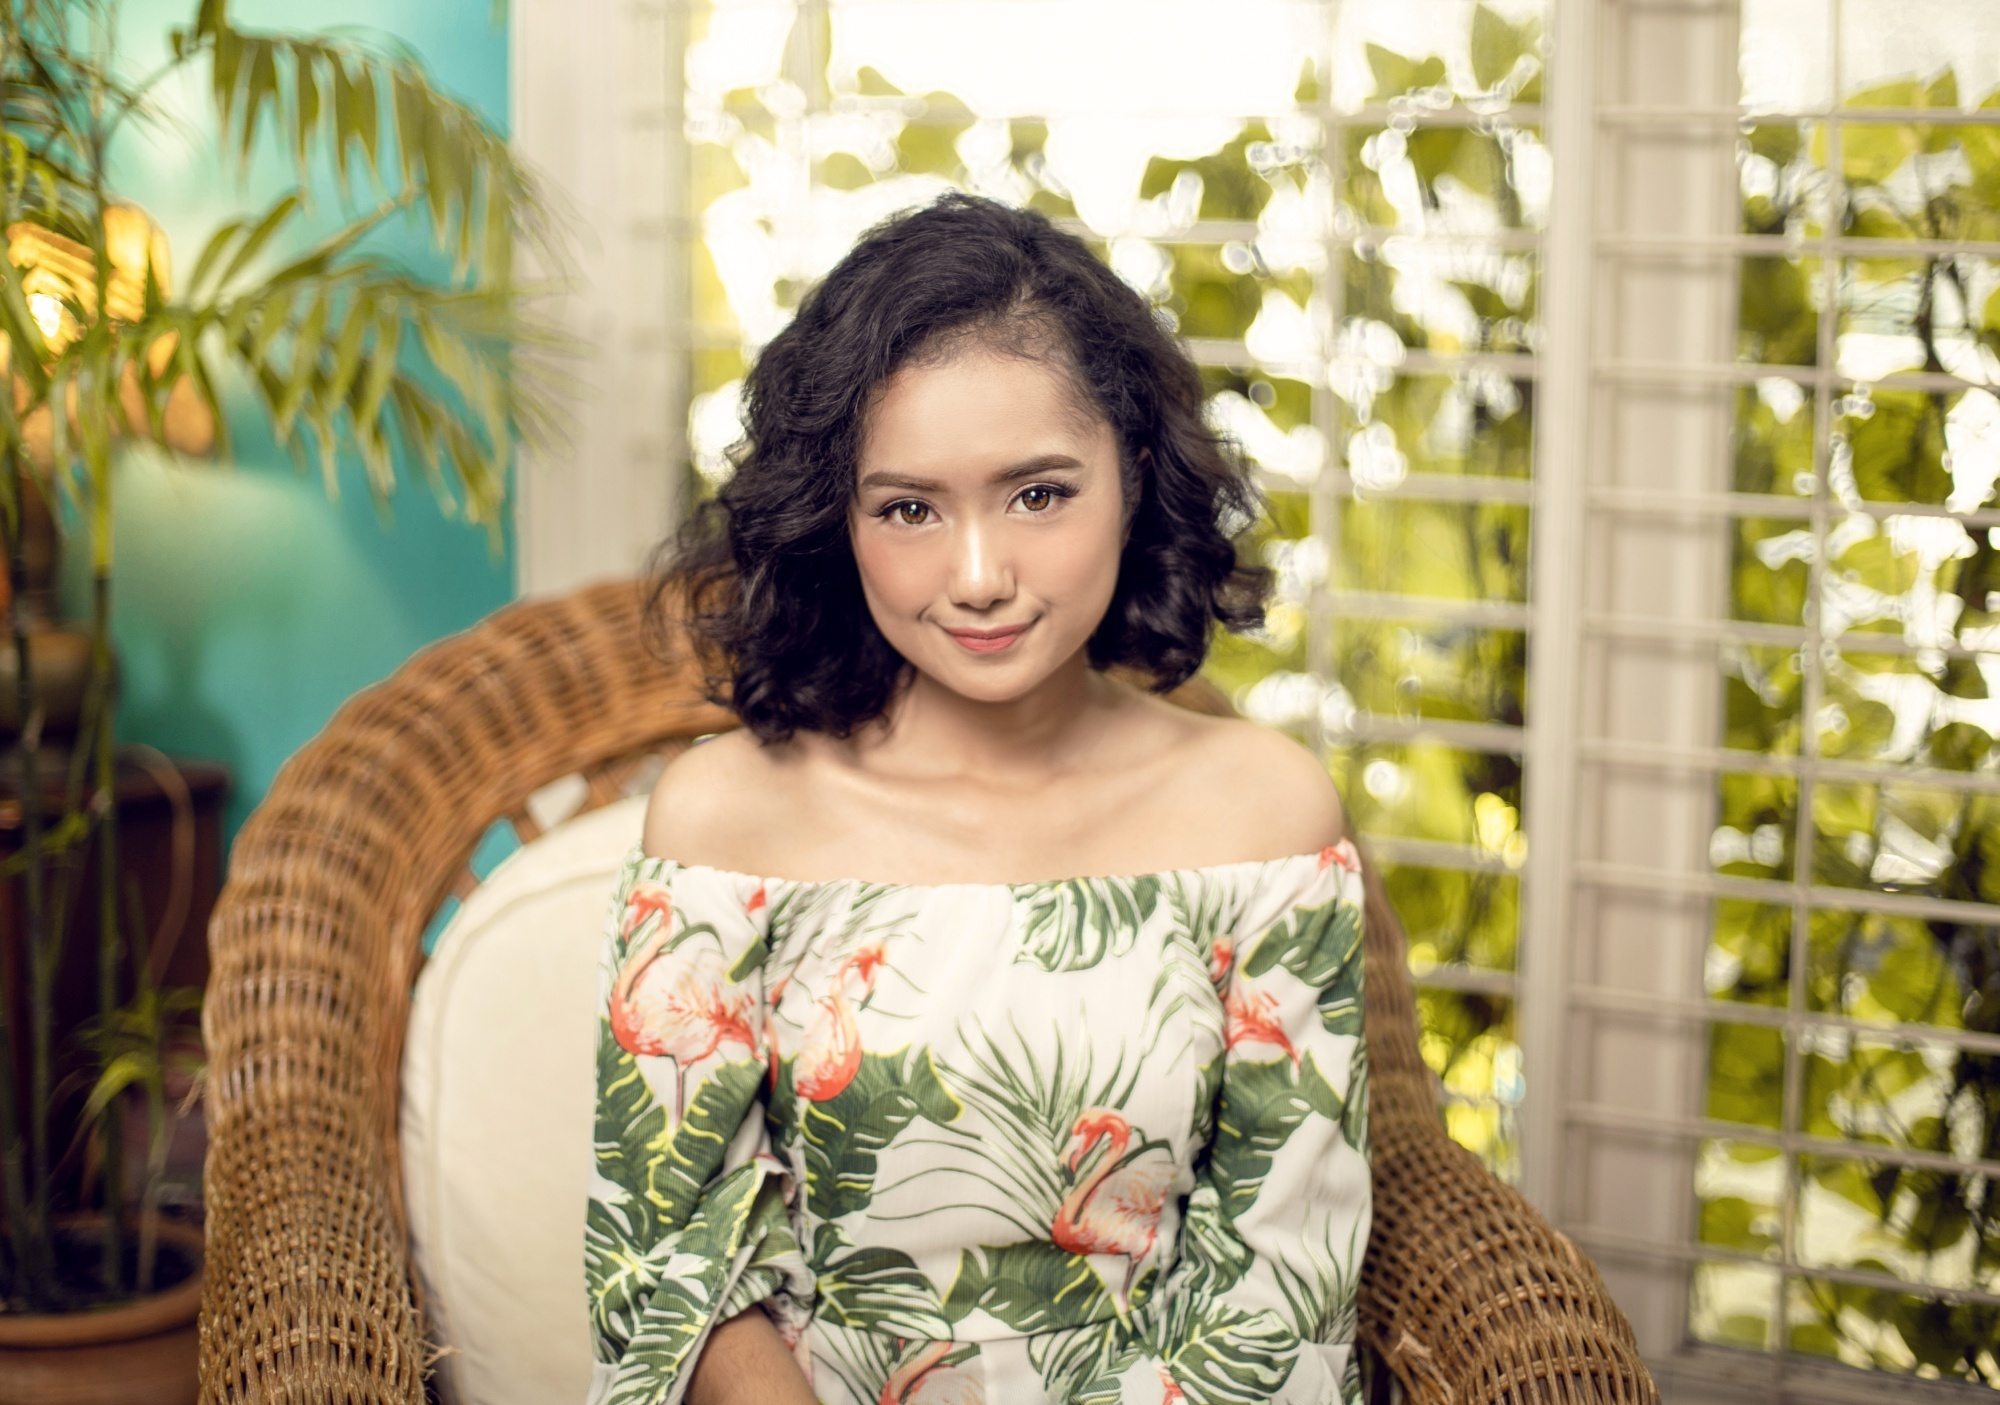 Asian woman with short hair curls sitting on a wicker chair